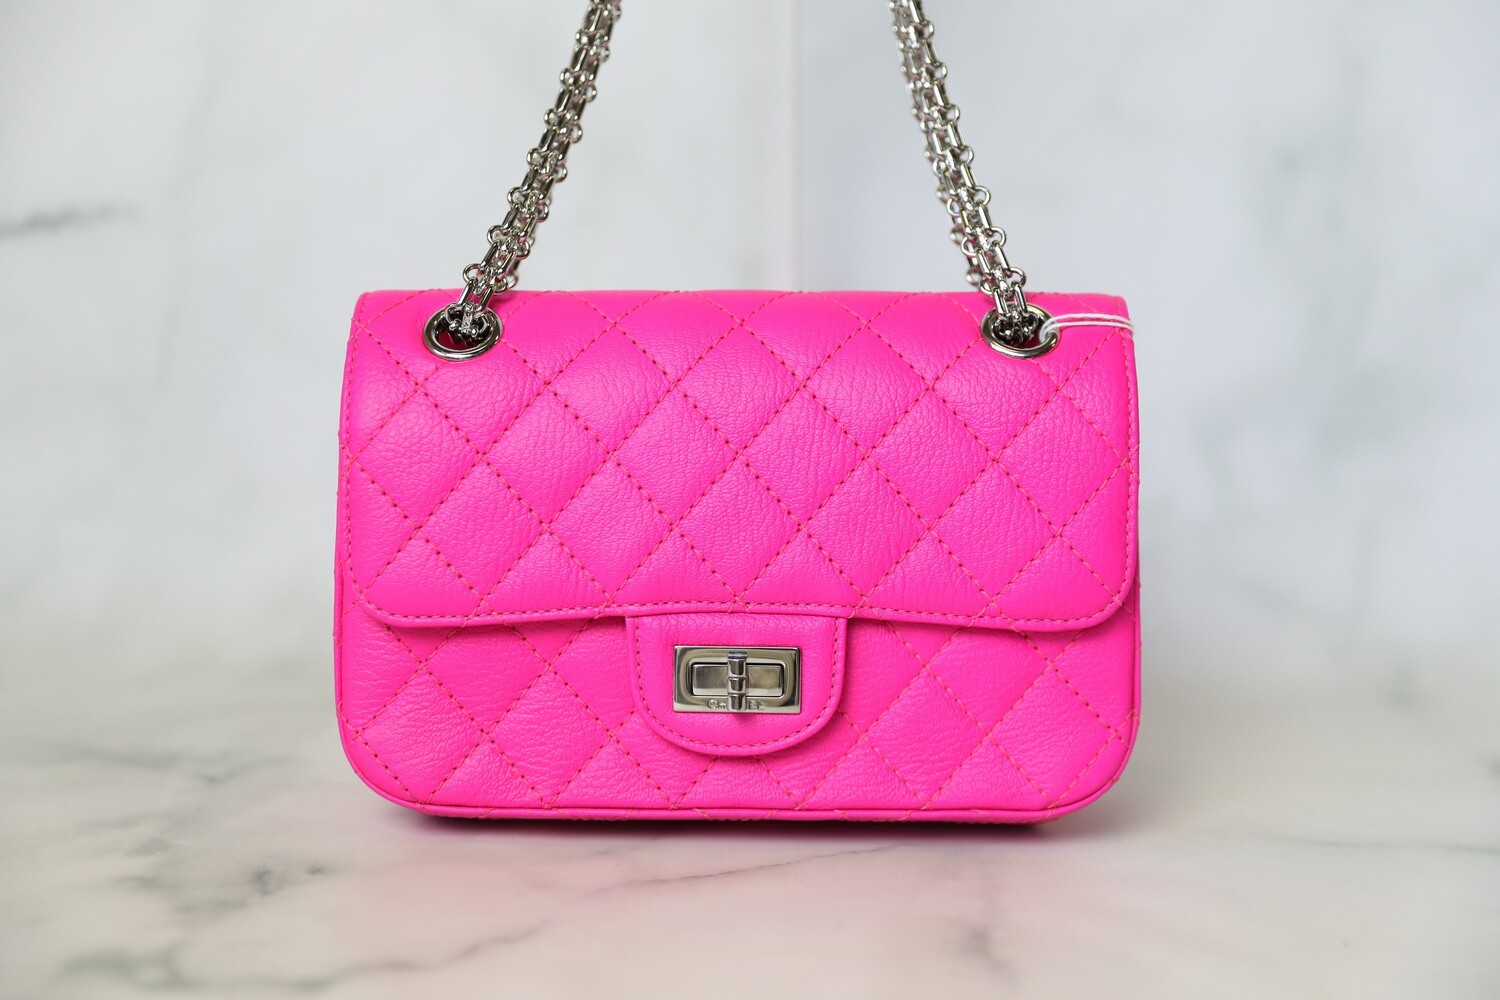 Chanel Reissue Mini, Bright Pink Calfskin with Silver Hardware